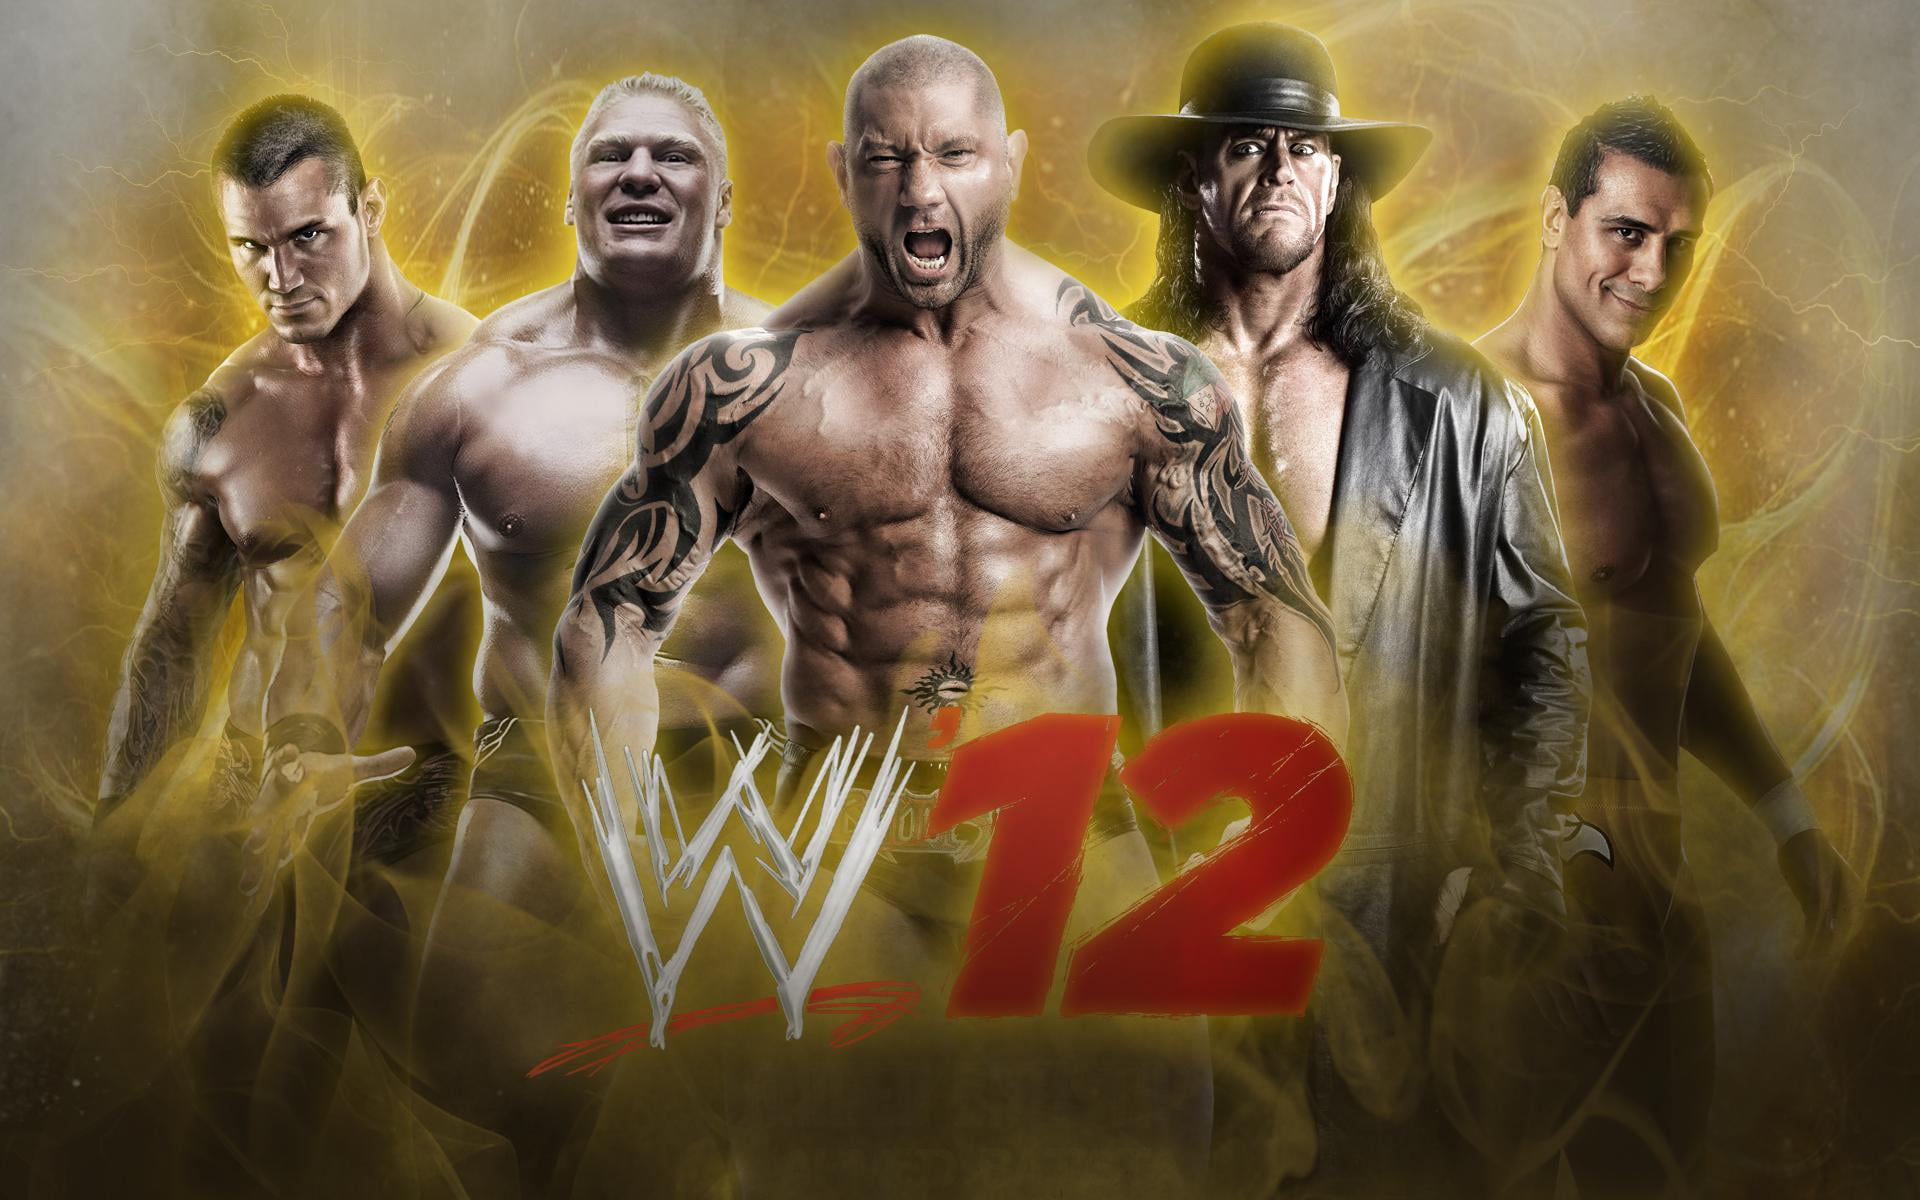 WWE 12 Wrestlers, shirtless, group of people, adult, young adult